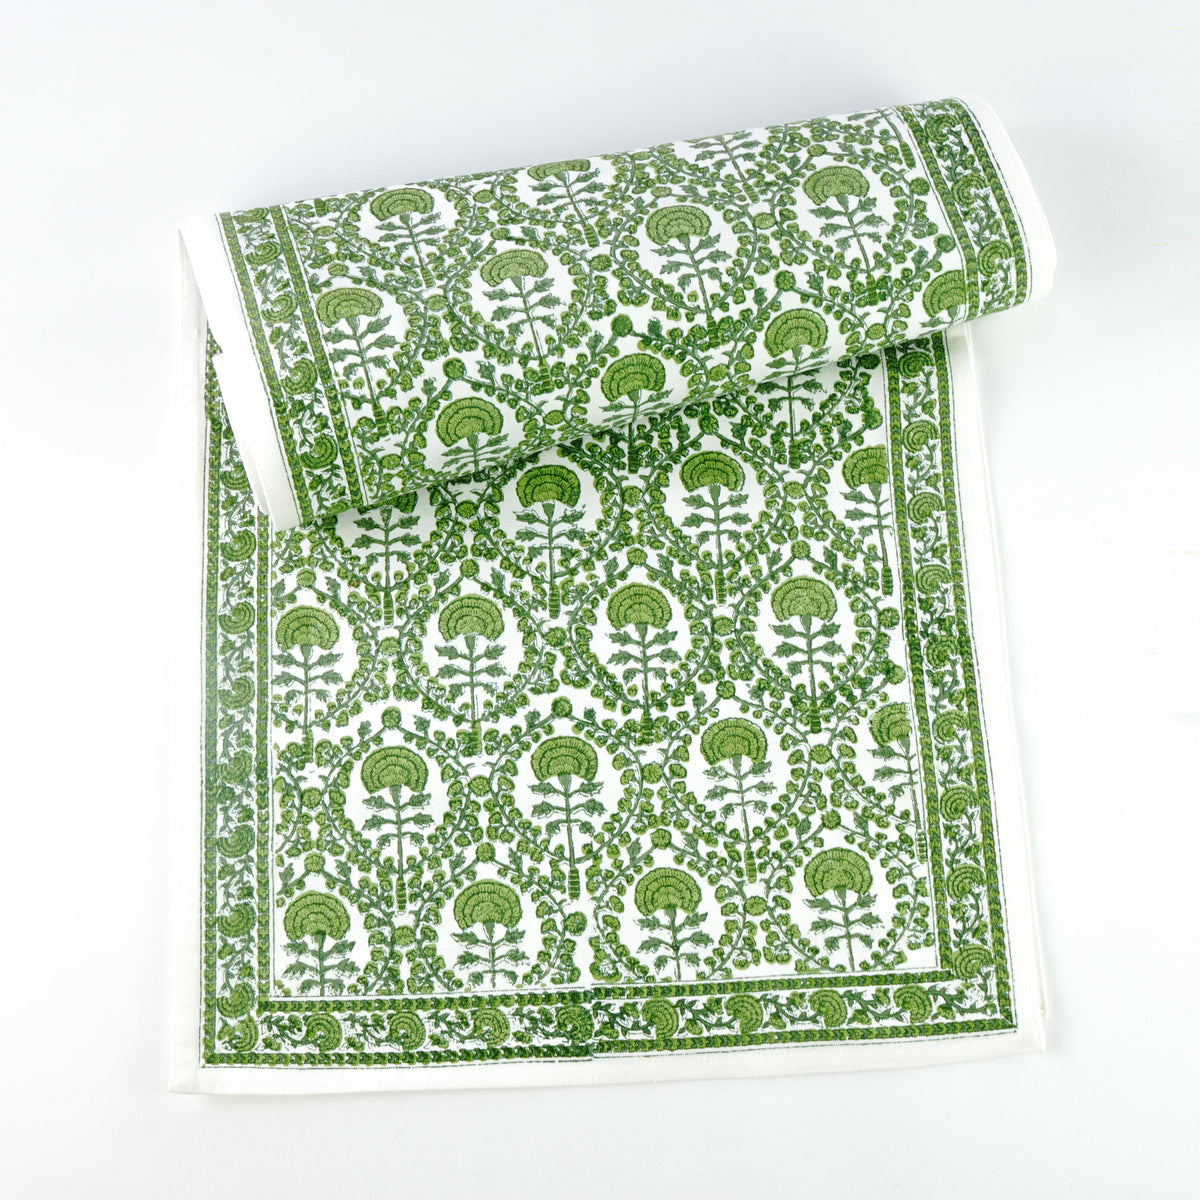 This 100% cotton table runner is a beautiful staple to have in your home and consists of rich and intricate green and white floral details. 